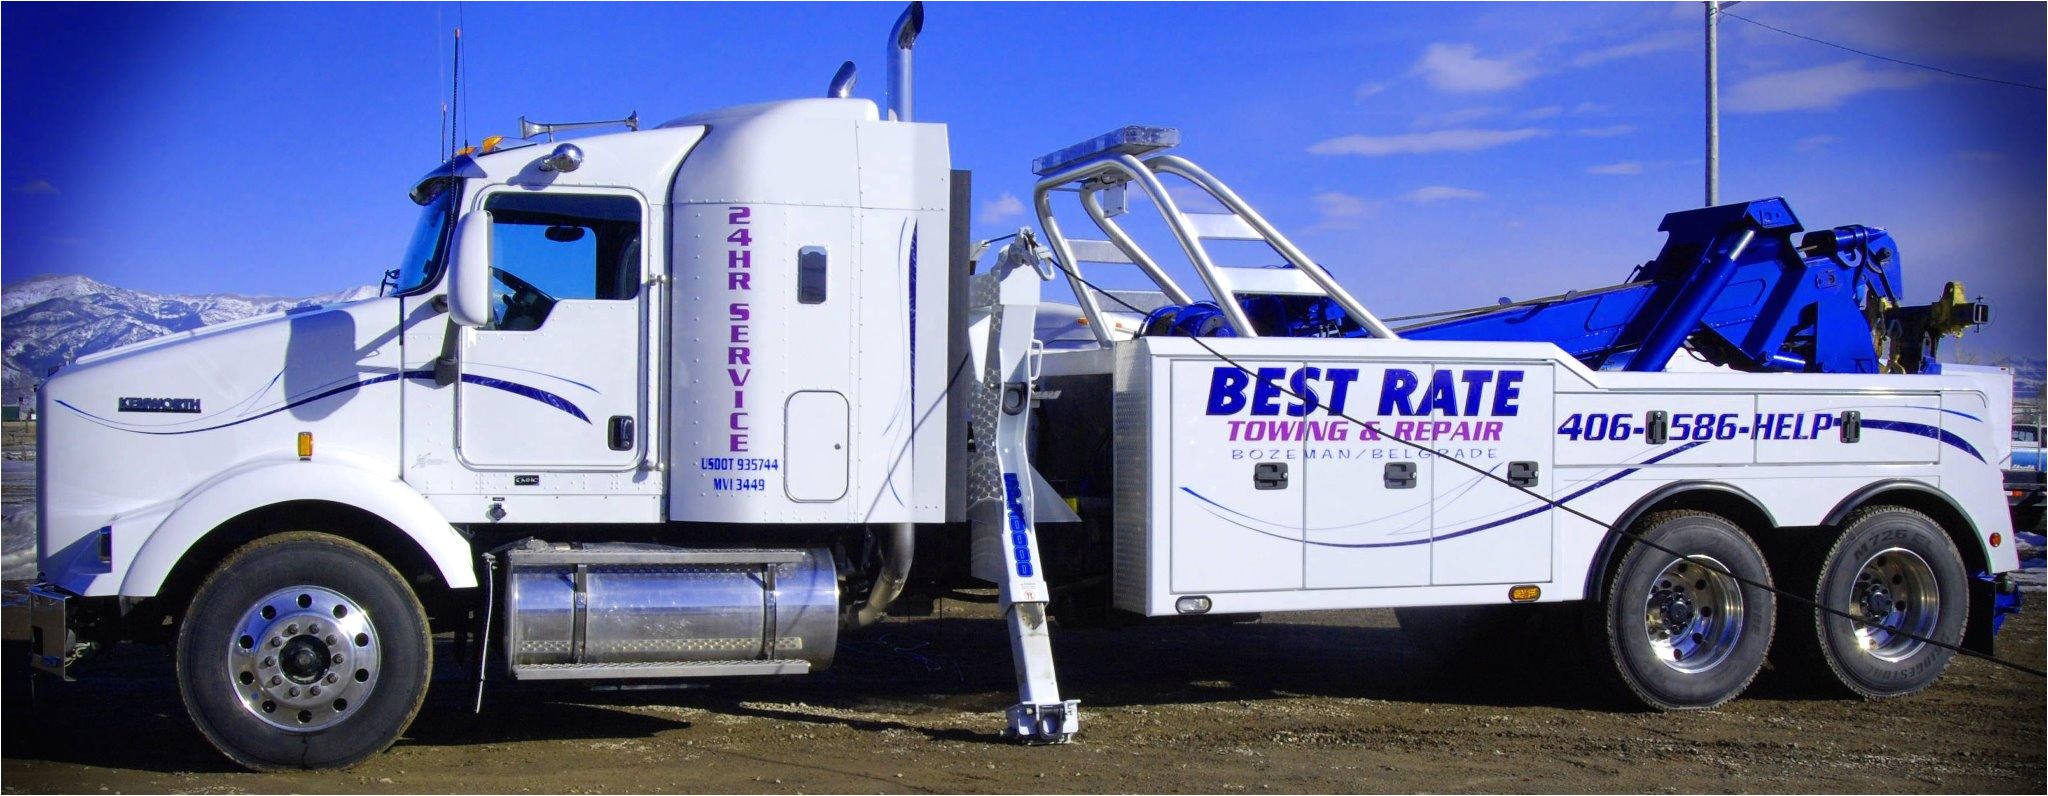 best rate towing and repair 2